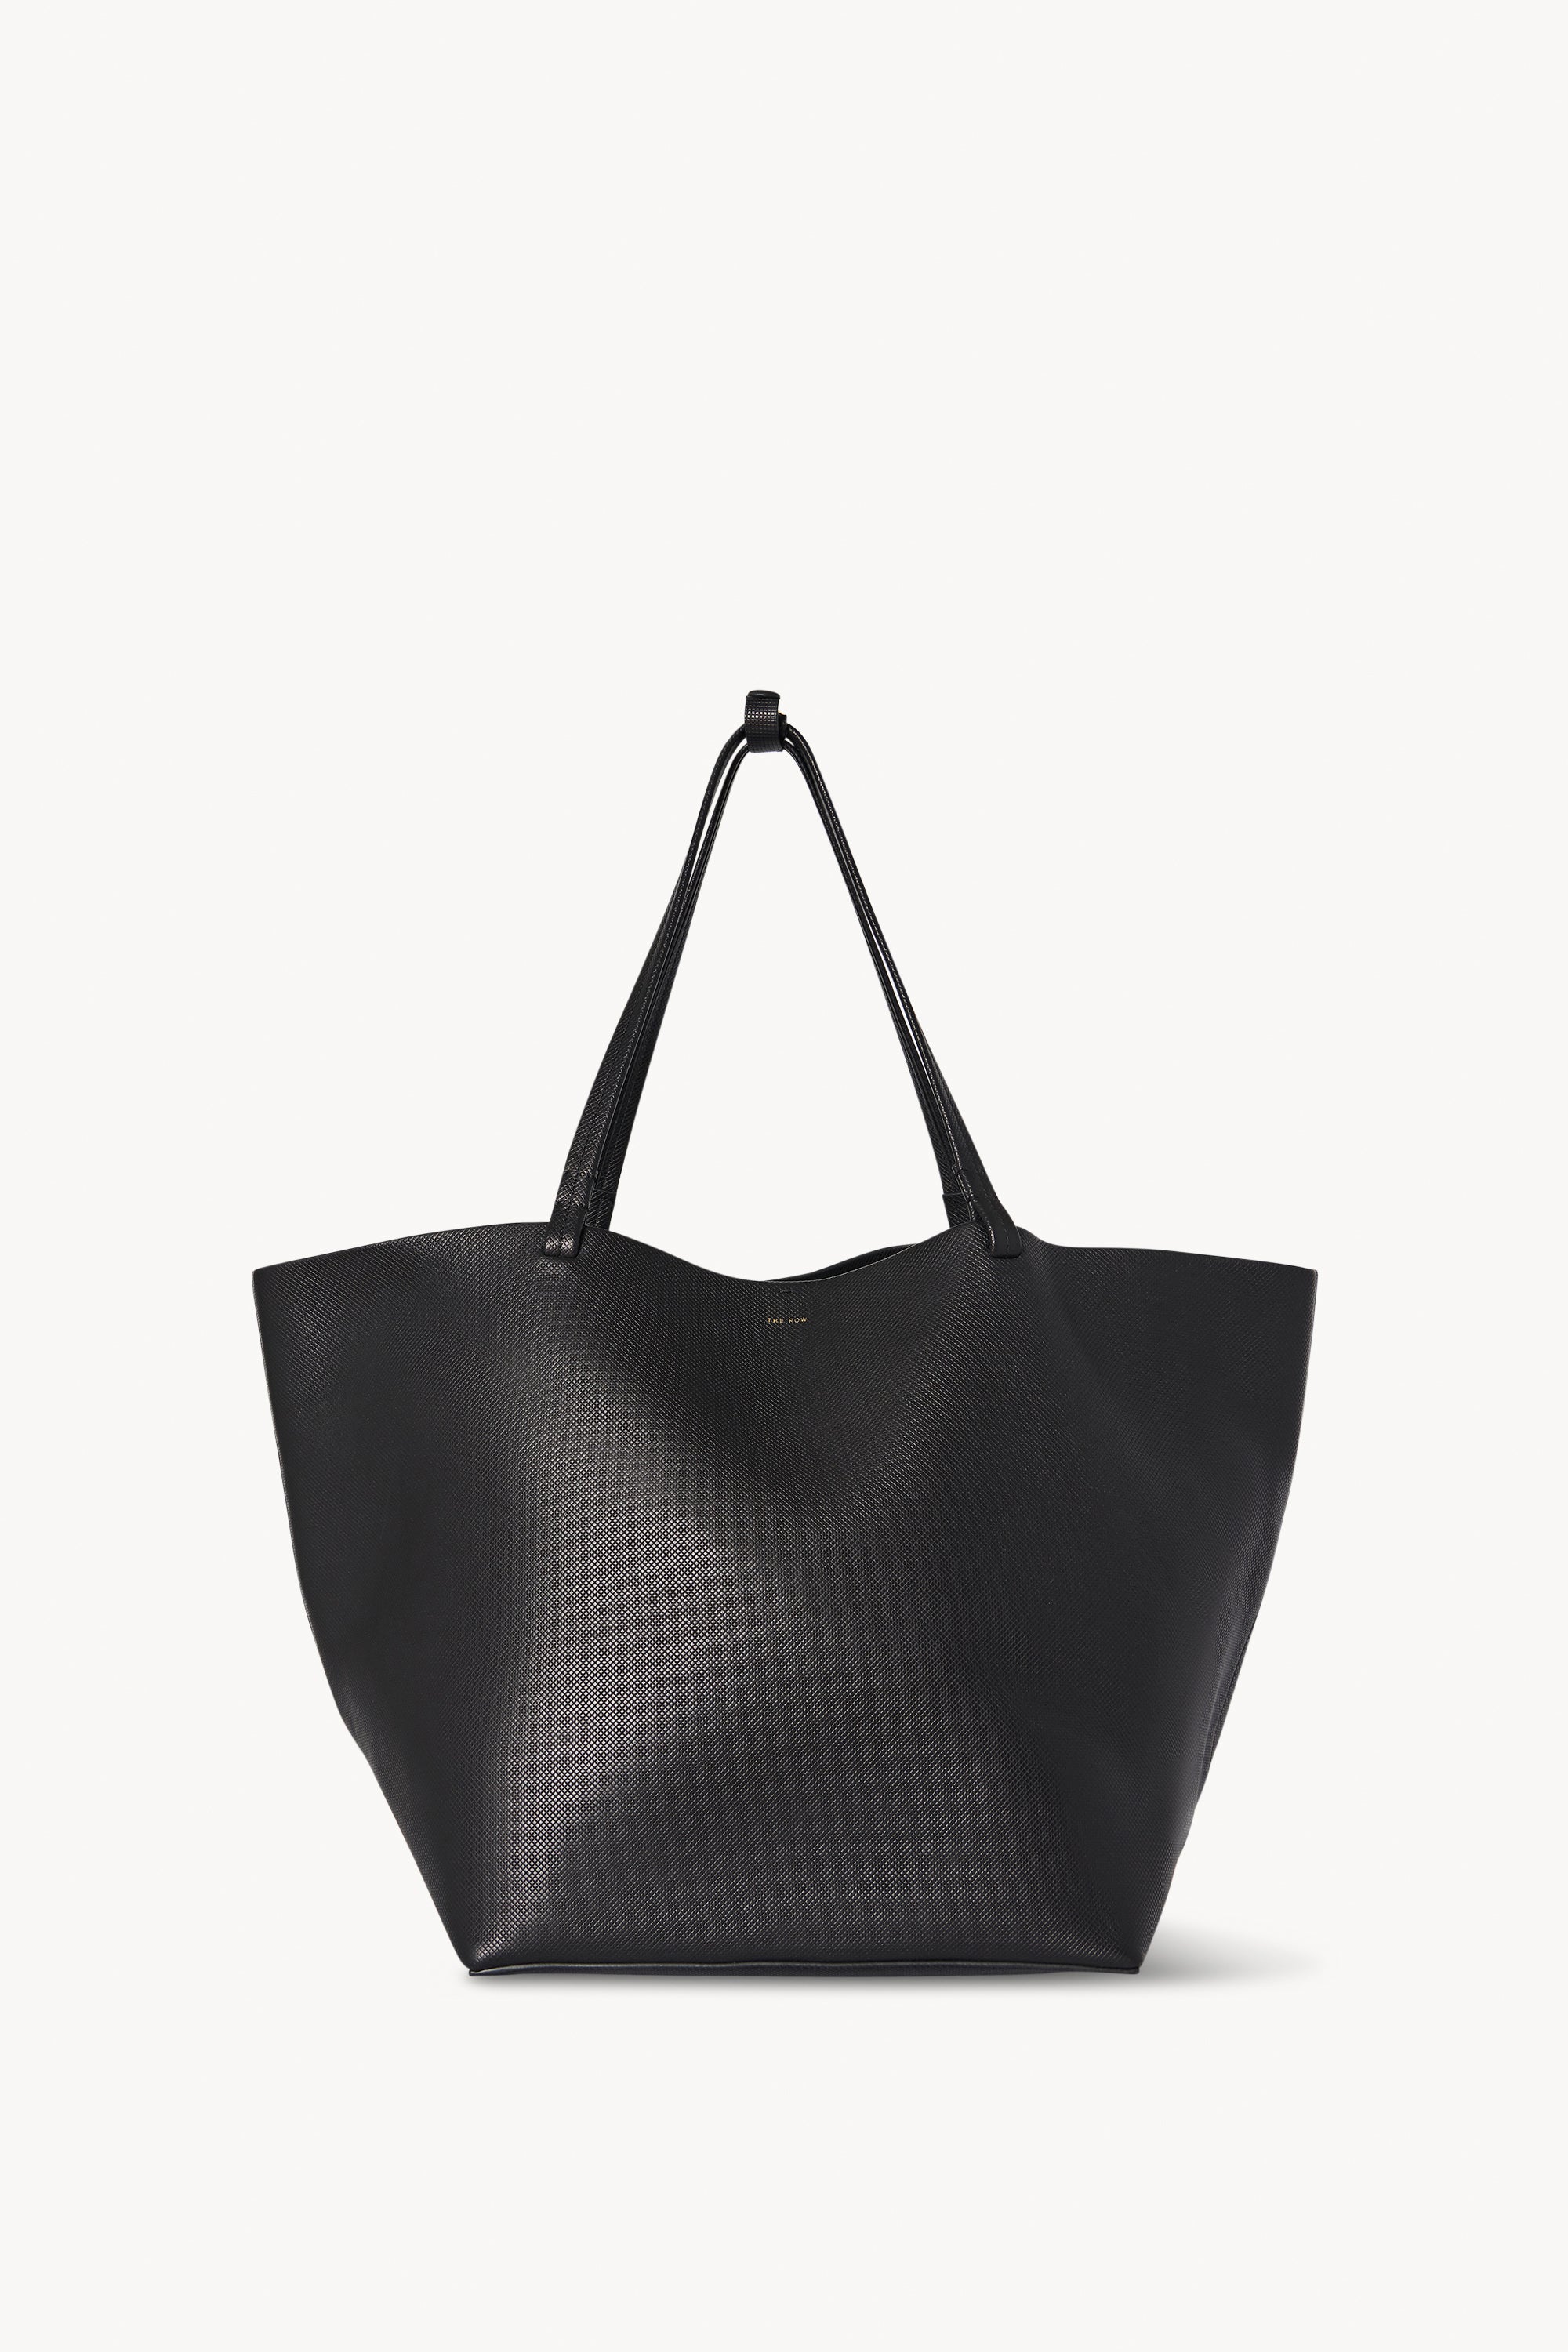 Park Tote Three Bag Black in Leather – The Row